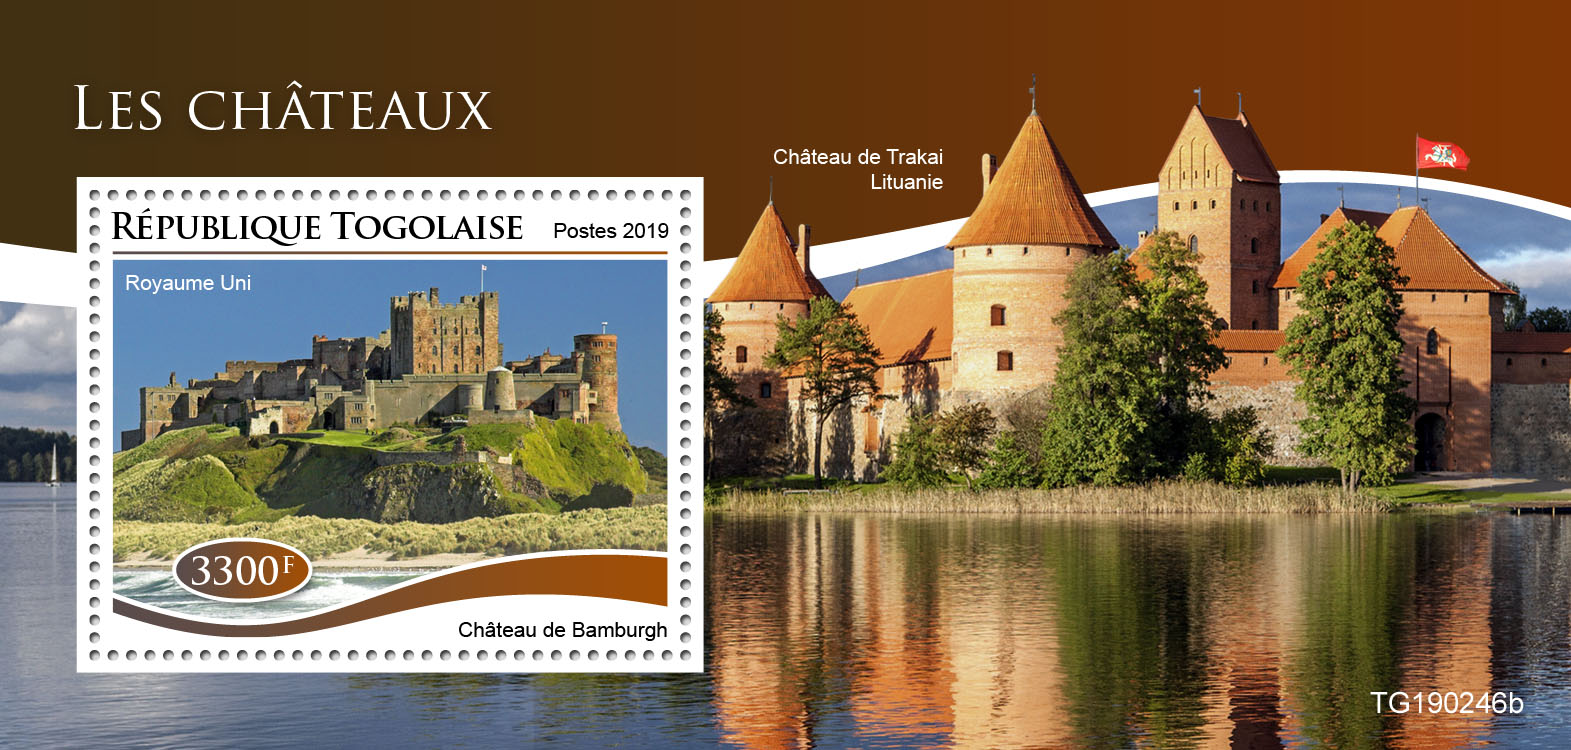 Castles - Issue of Togo postage stamps